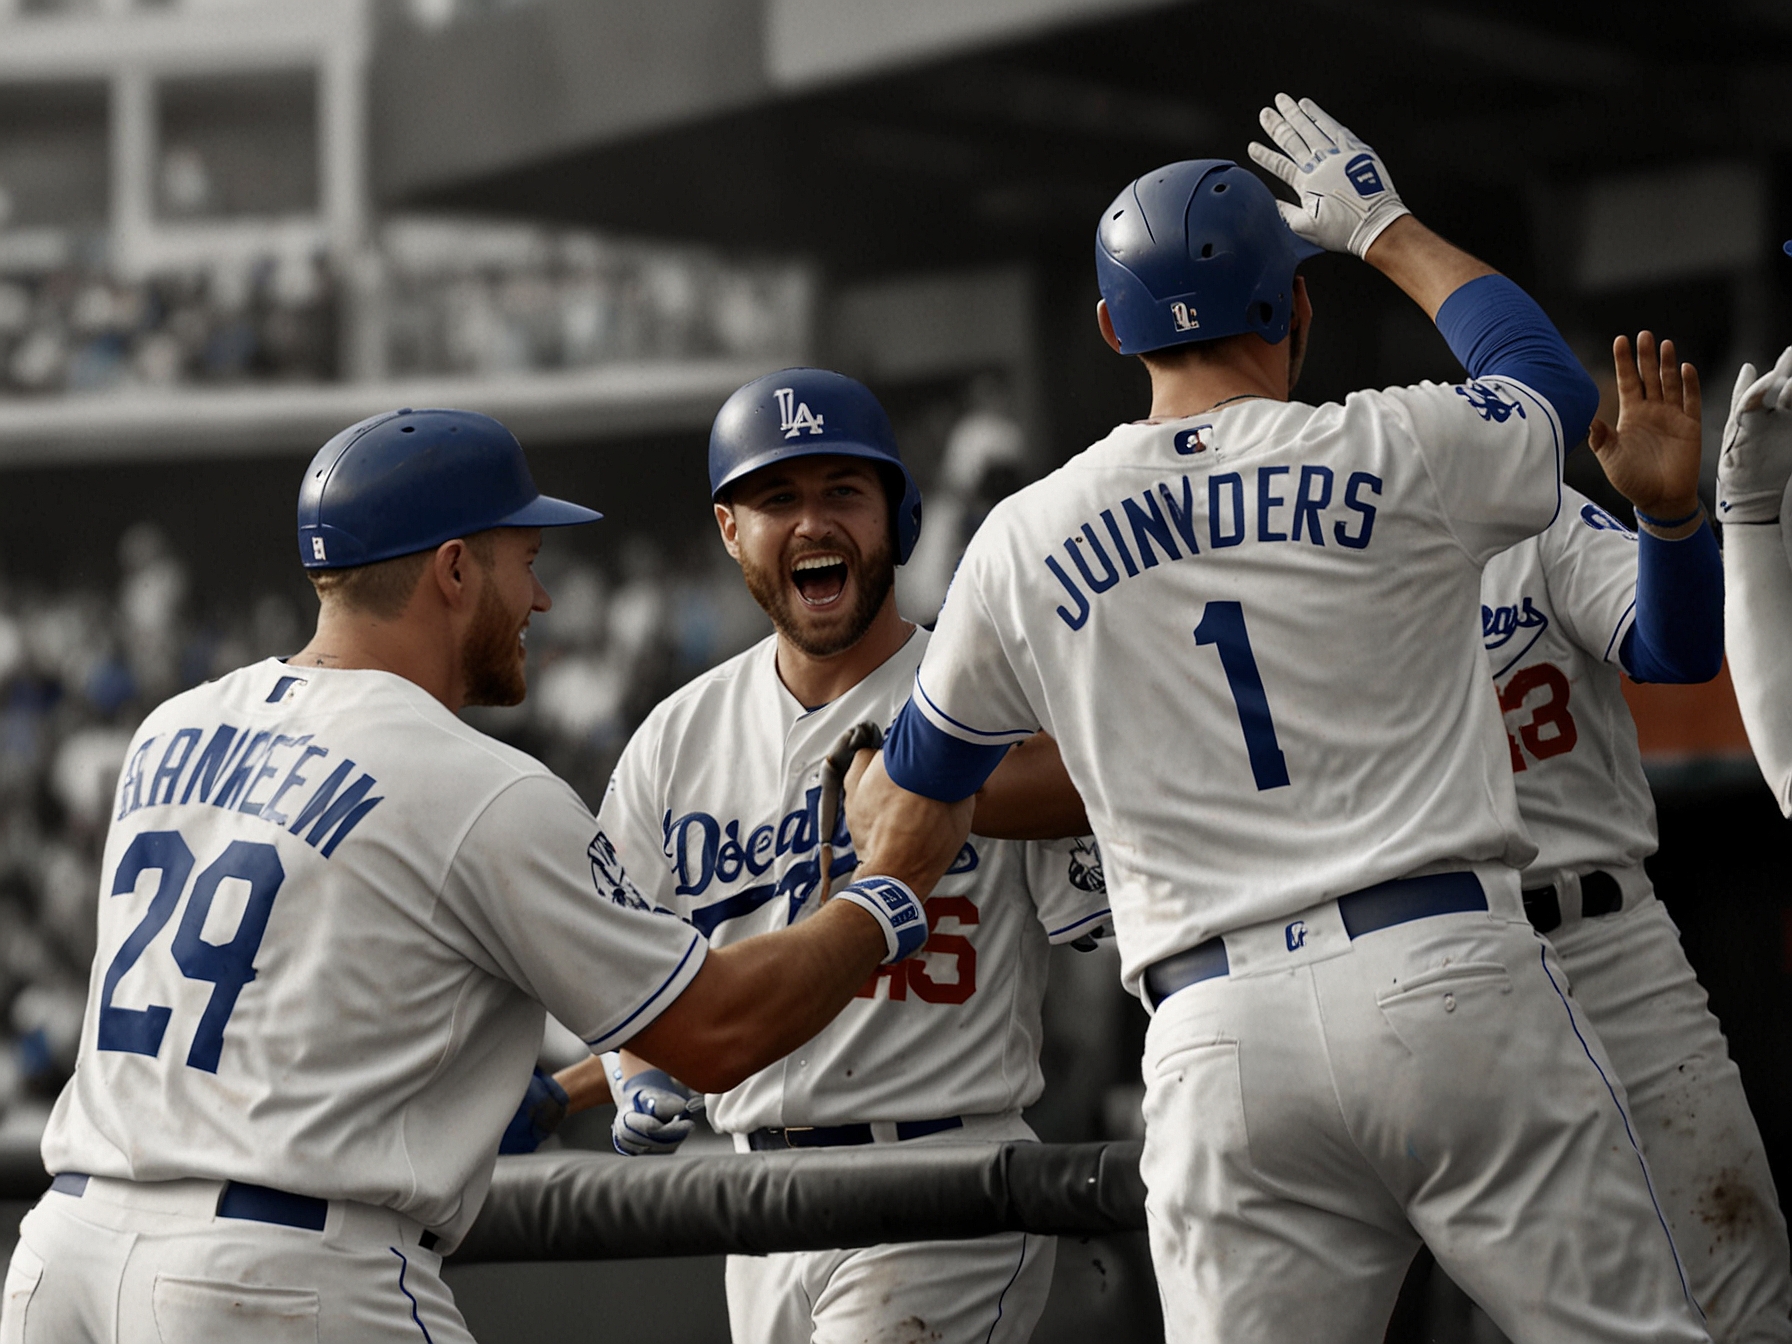 The jubilant Dodgers team celebrates after scoring seven runs in the 11th inning at Oracle Park, taking a commanding lead over the San Francisco Giants and securing their 14-7 victory.